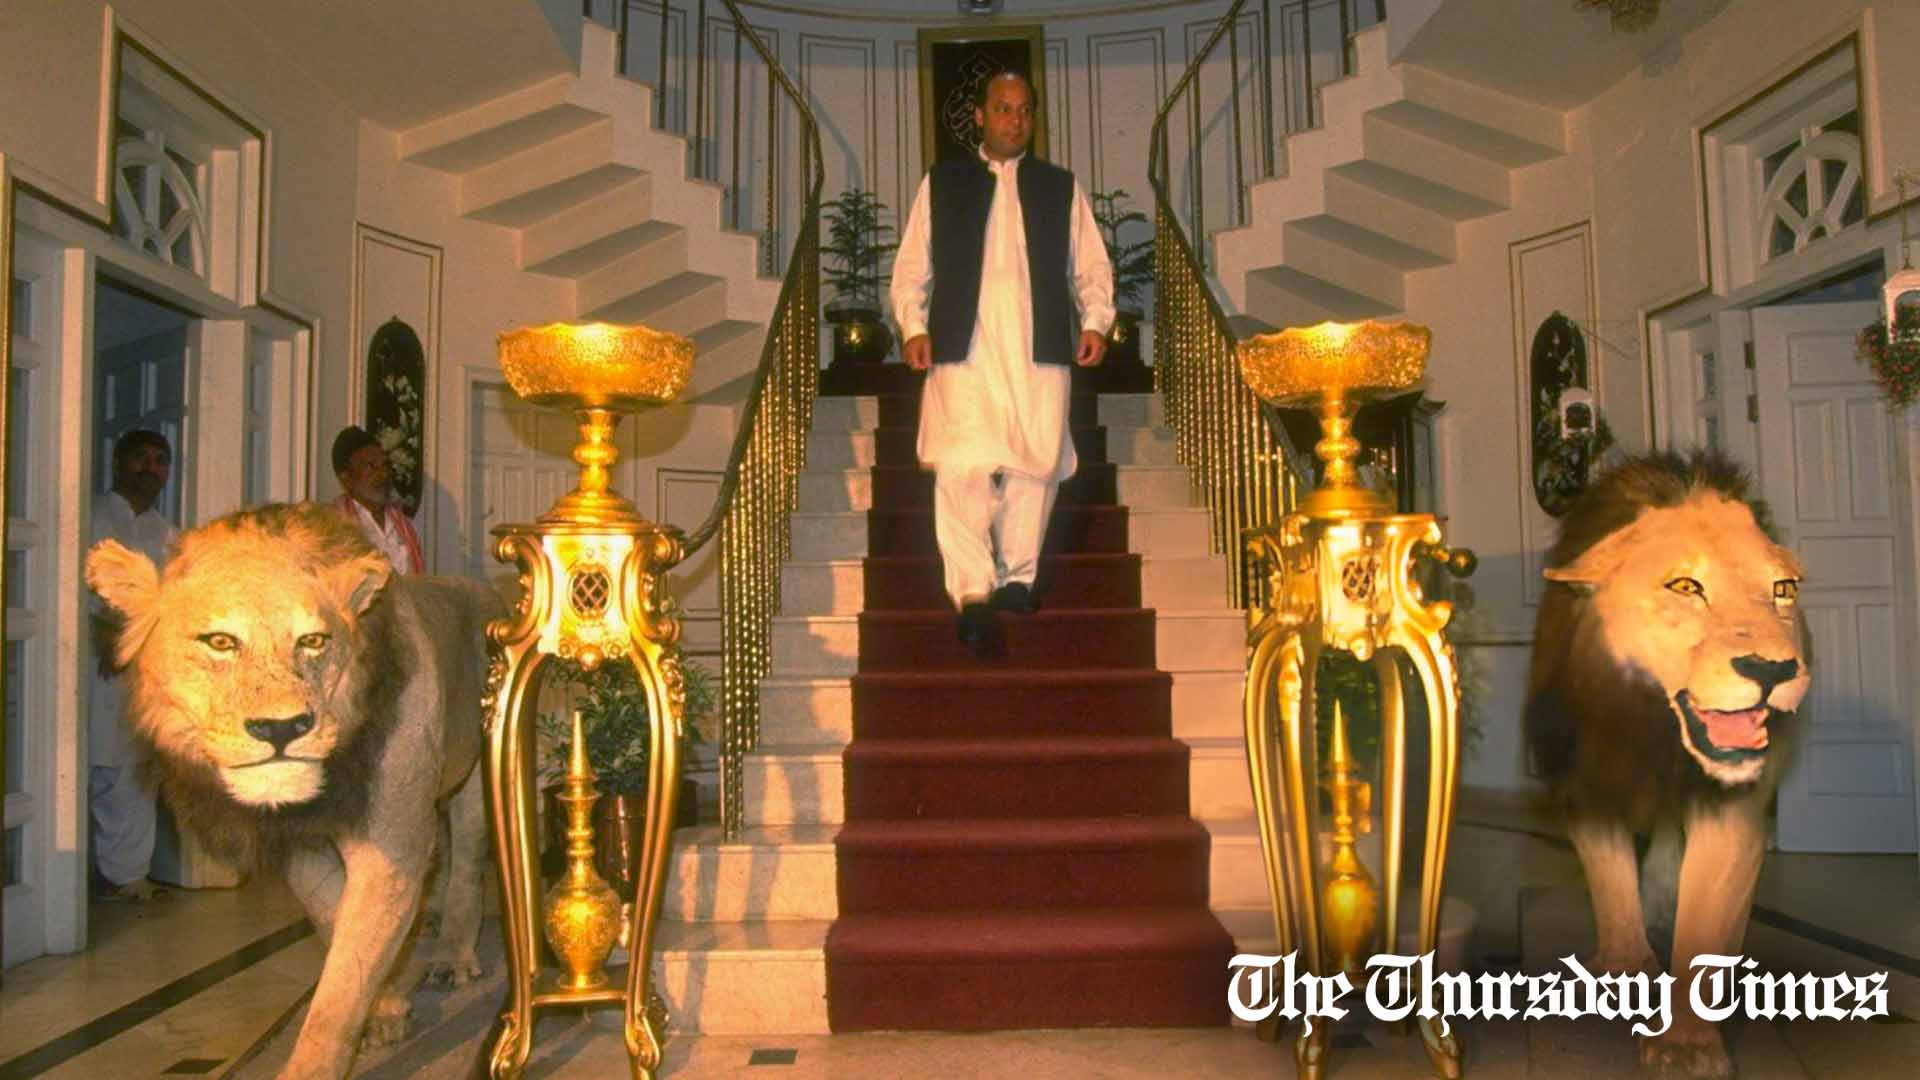 A file photo is shown of then-PM candidate Nawaz Sharif descending a flight of stairs encompassed by lions, the PML(N)'s novel party symbol. — FILE